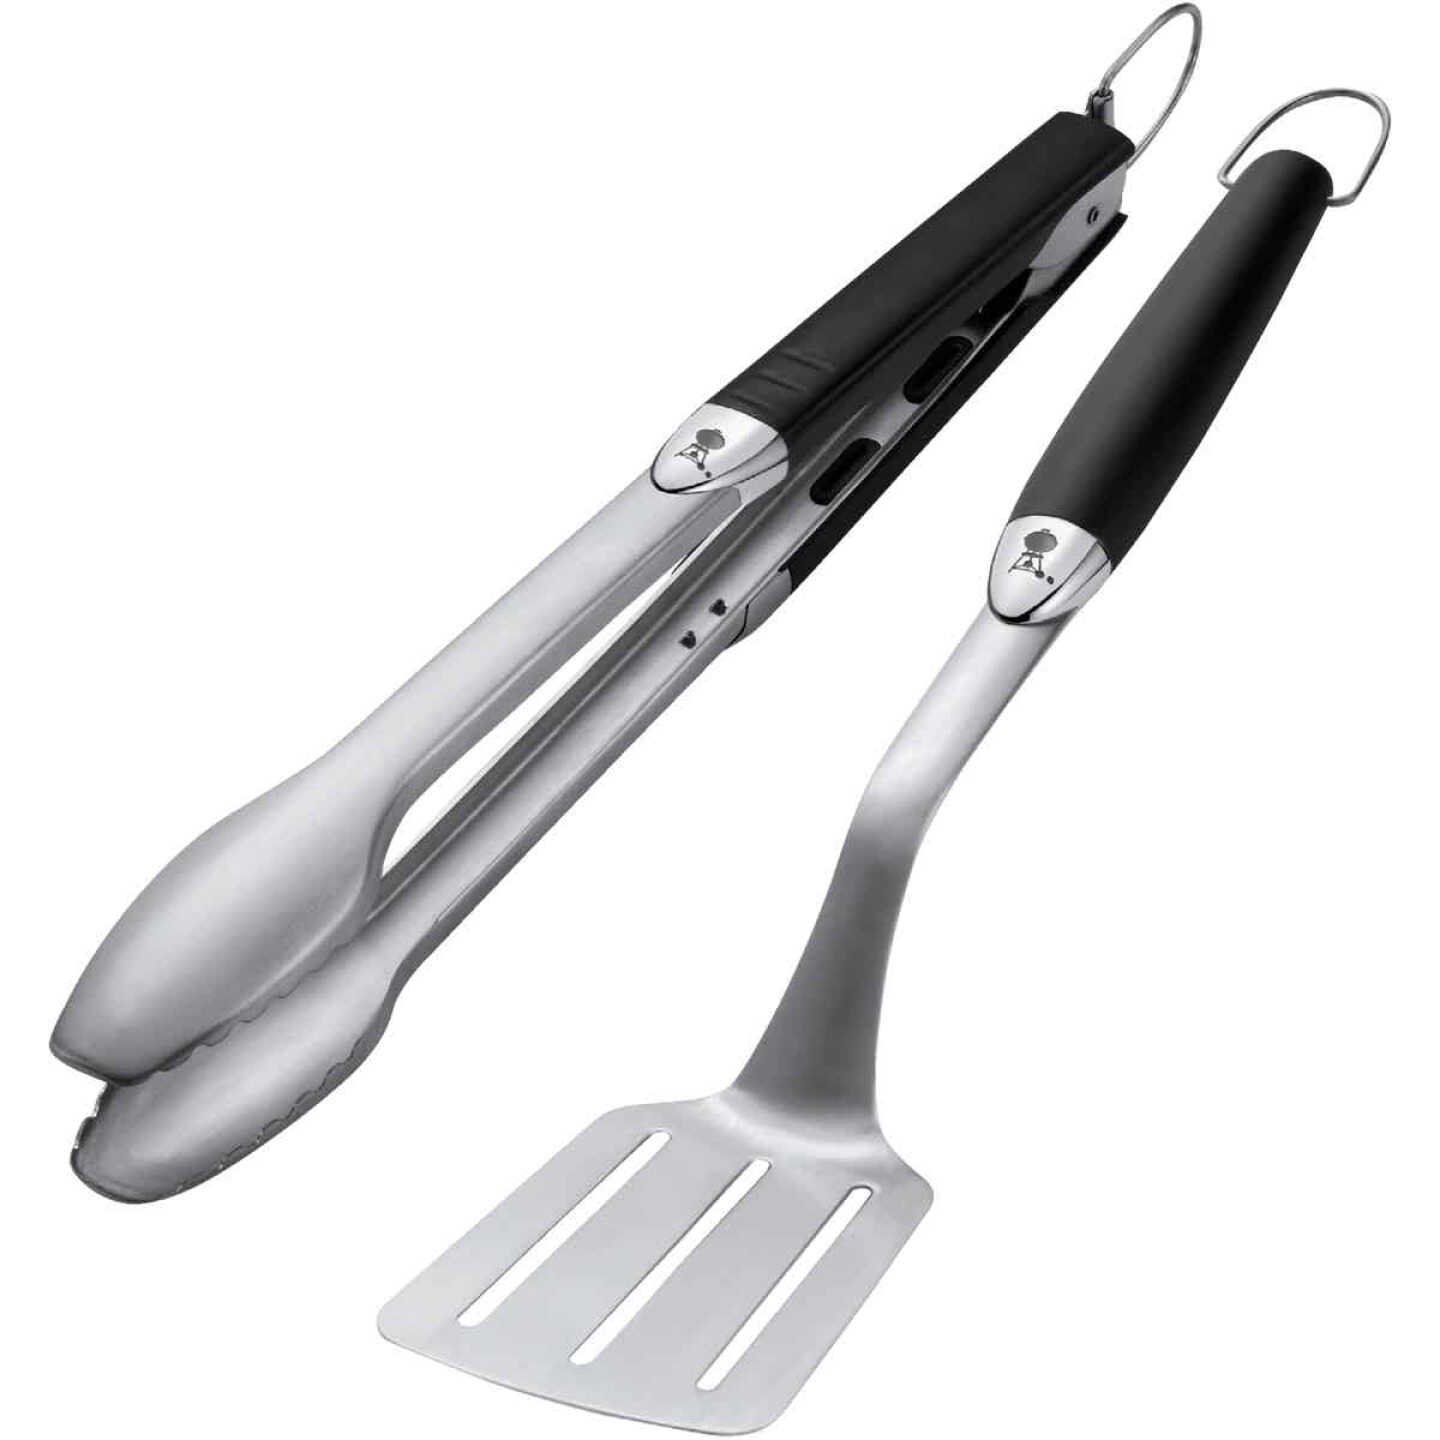 Weber Soft Touch Stainless Steel 2-Piece Barbeque Tool Set - Foley